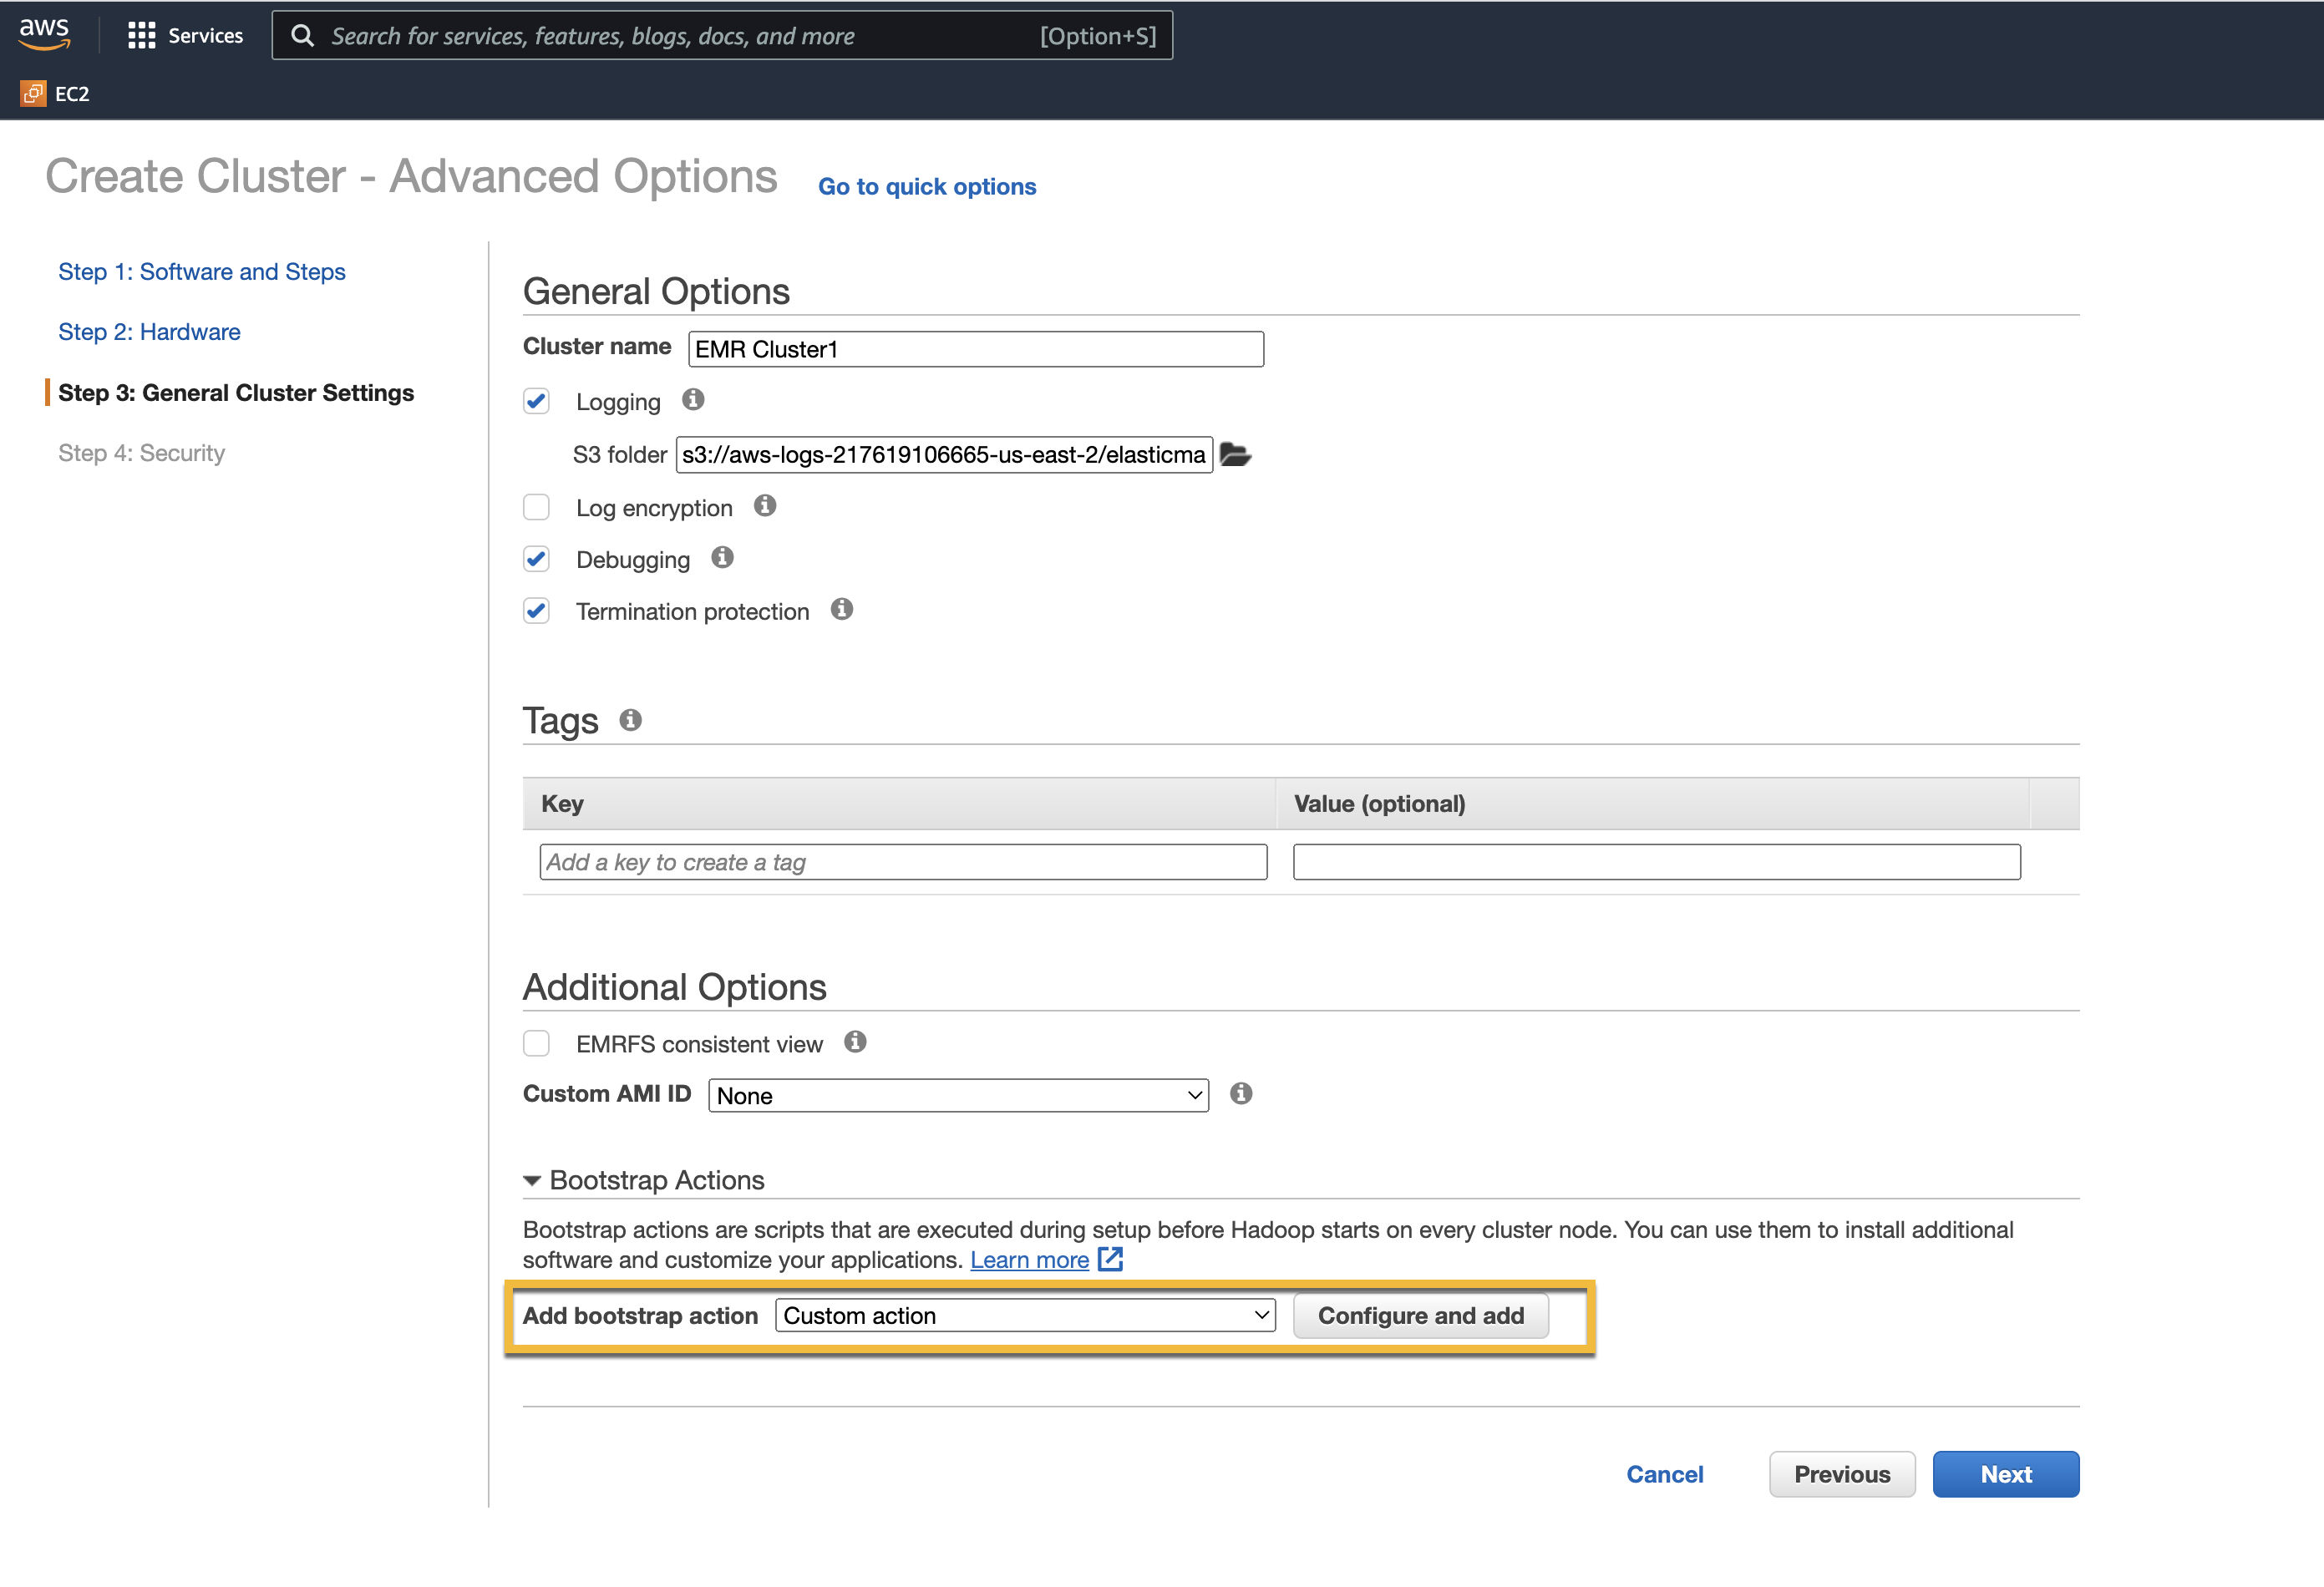 aws-marketpplace-step2a-advanced-options-generaloptions.png